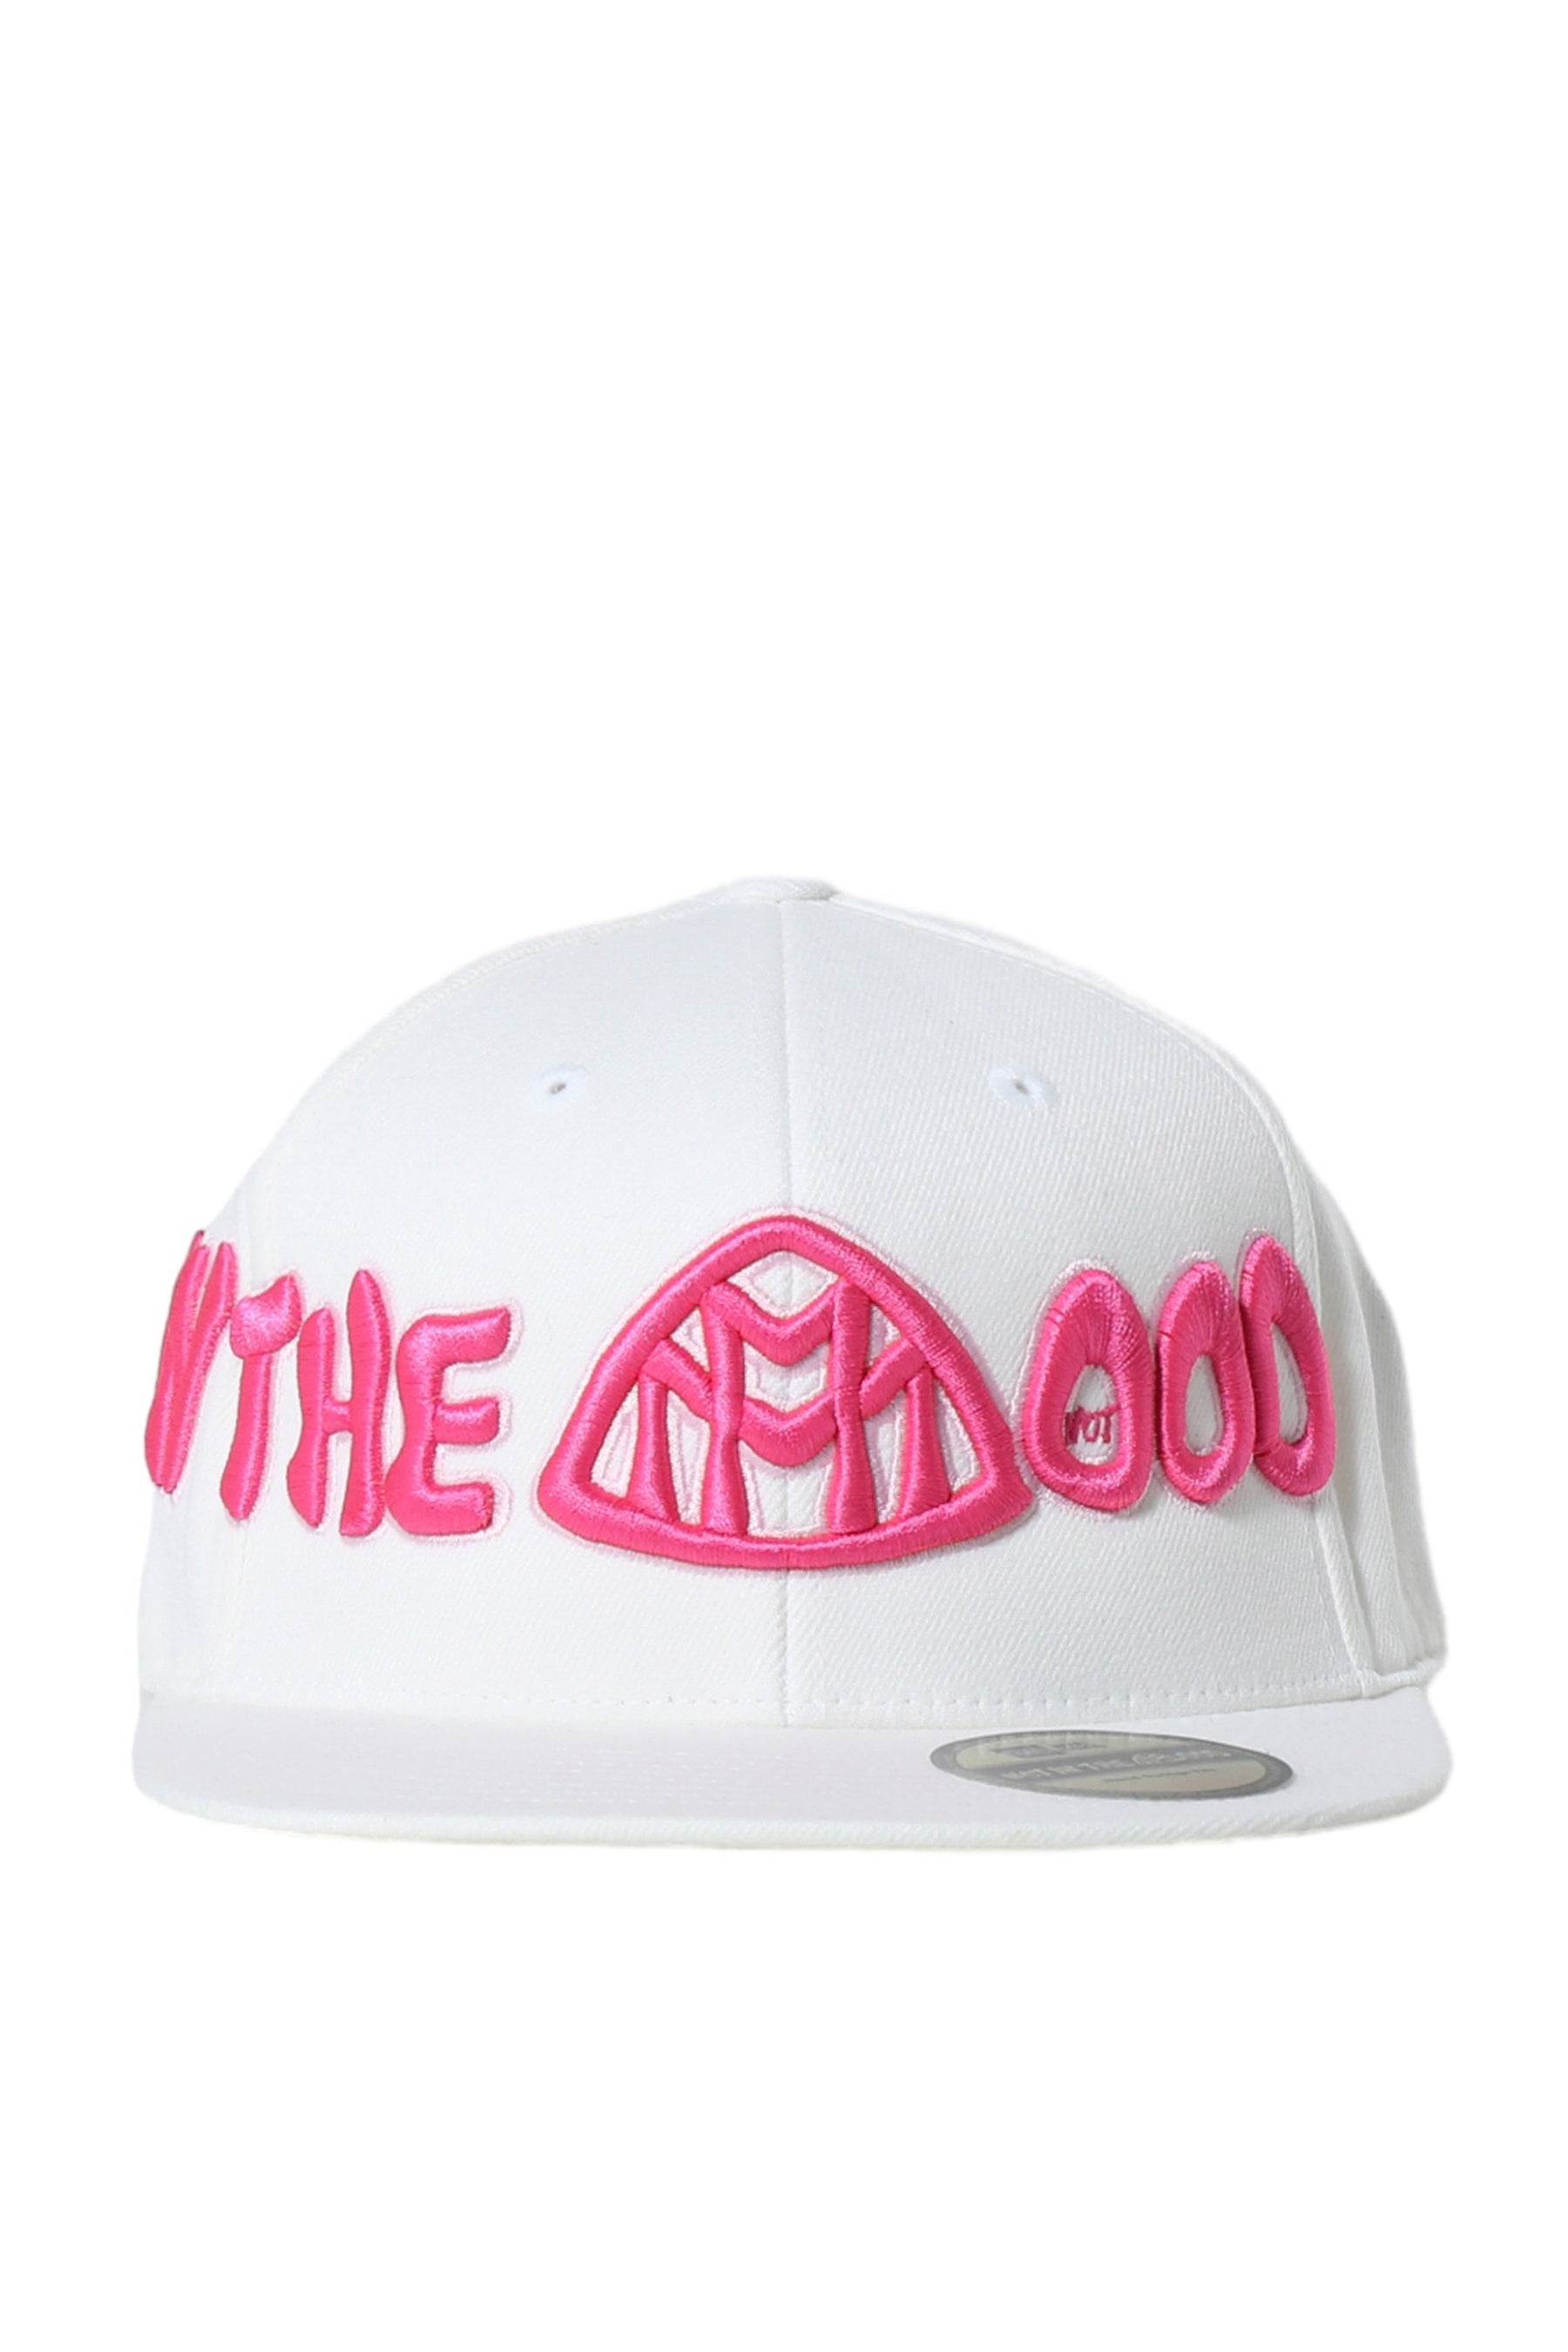 MS FITTED CAP / WHT PINK